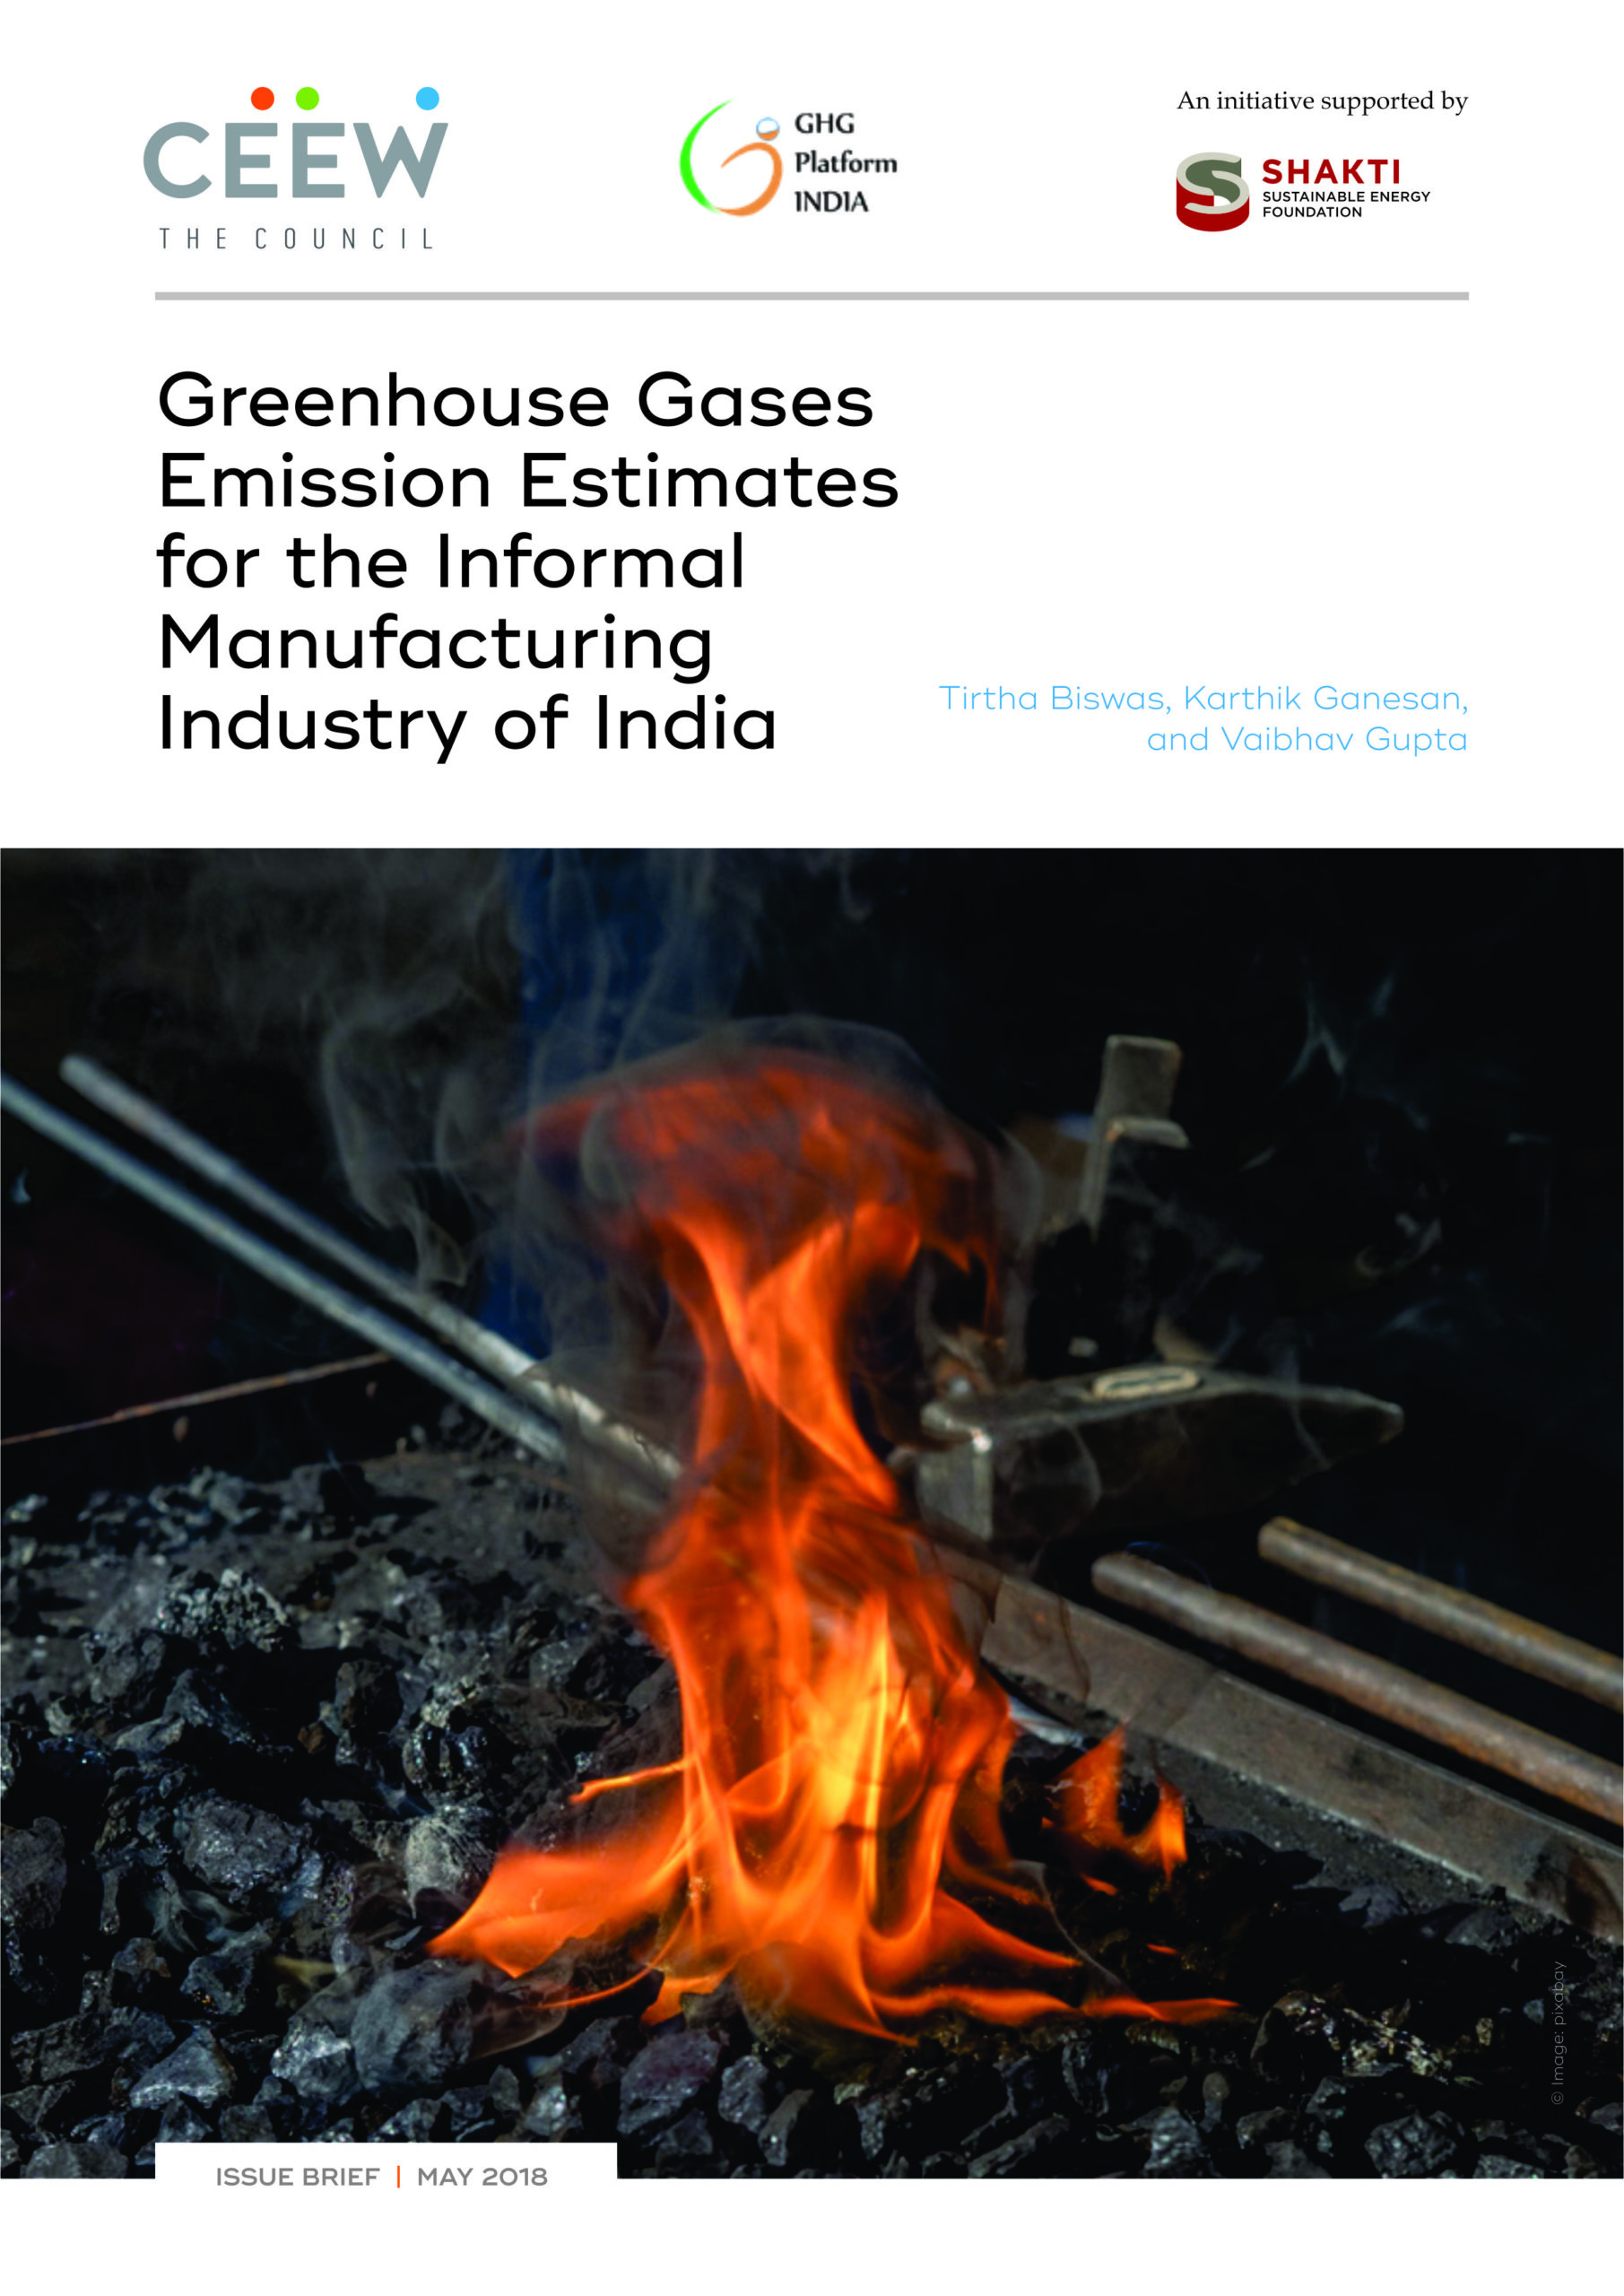 GHG Emission Estimates for the Informal Manufacturing Industry of India